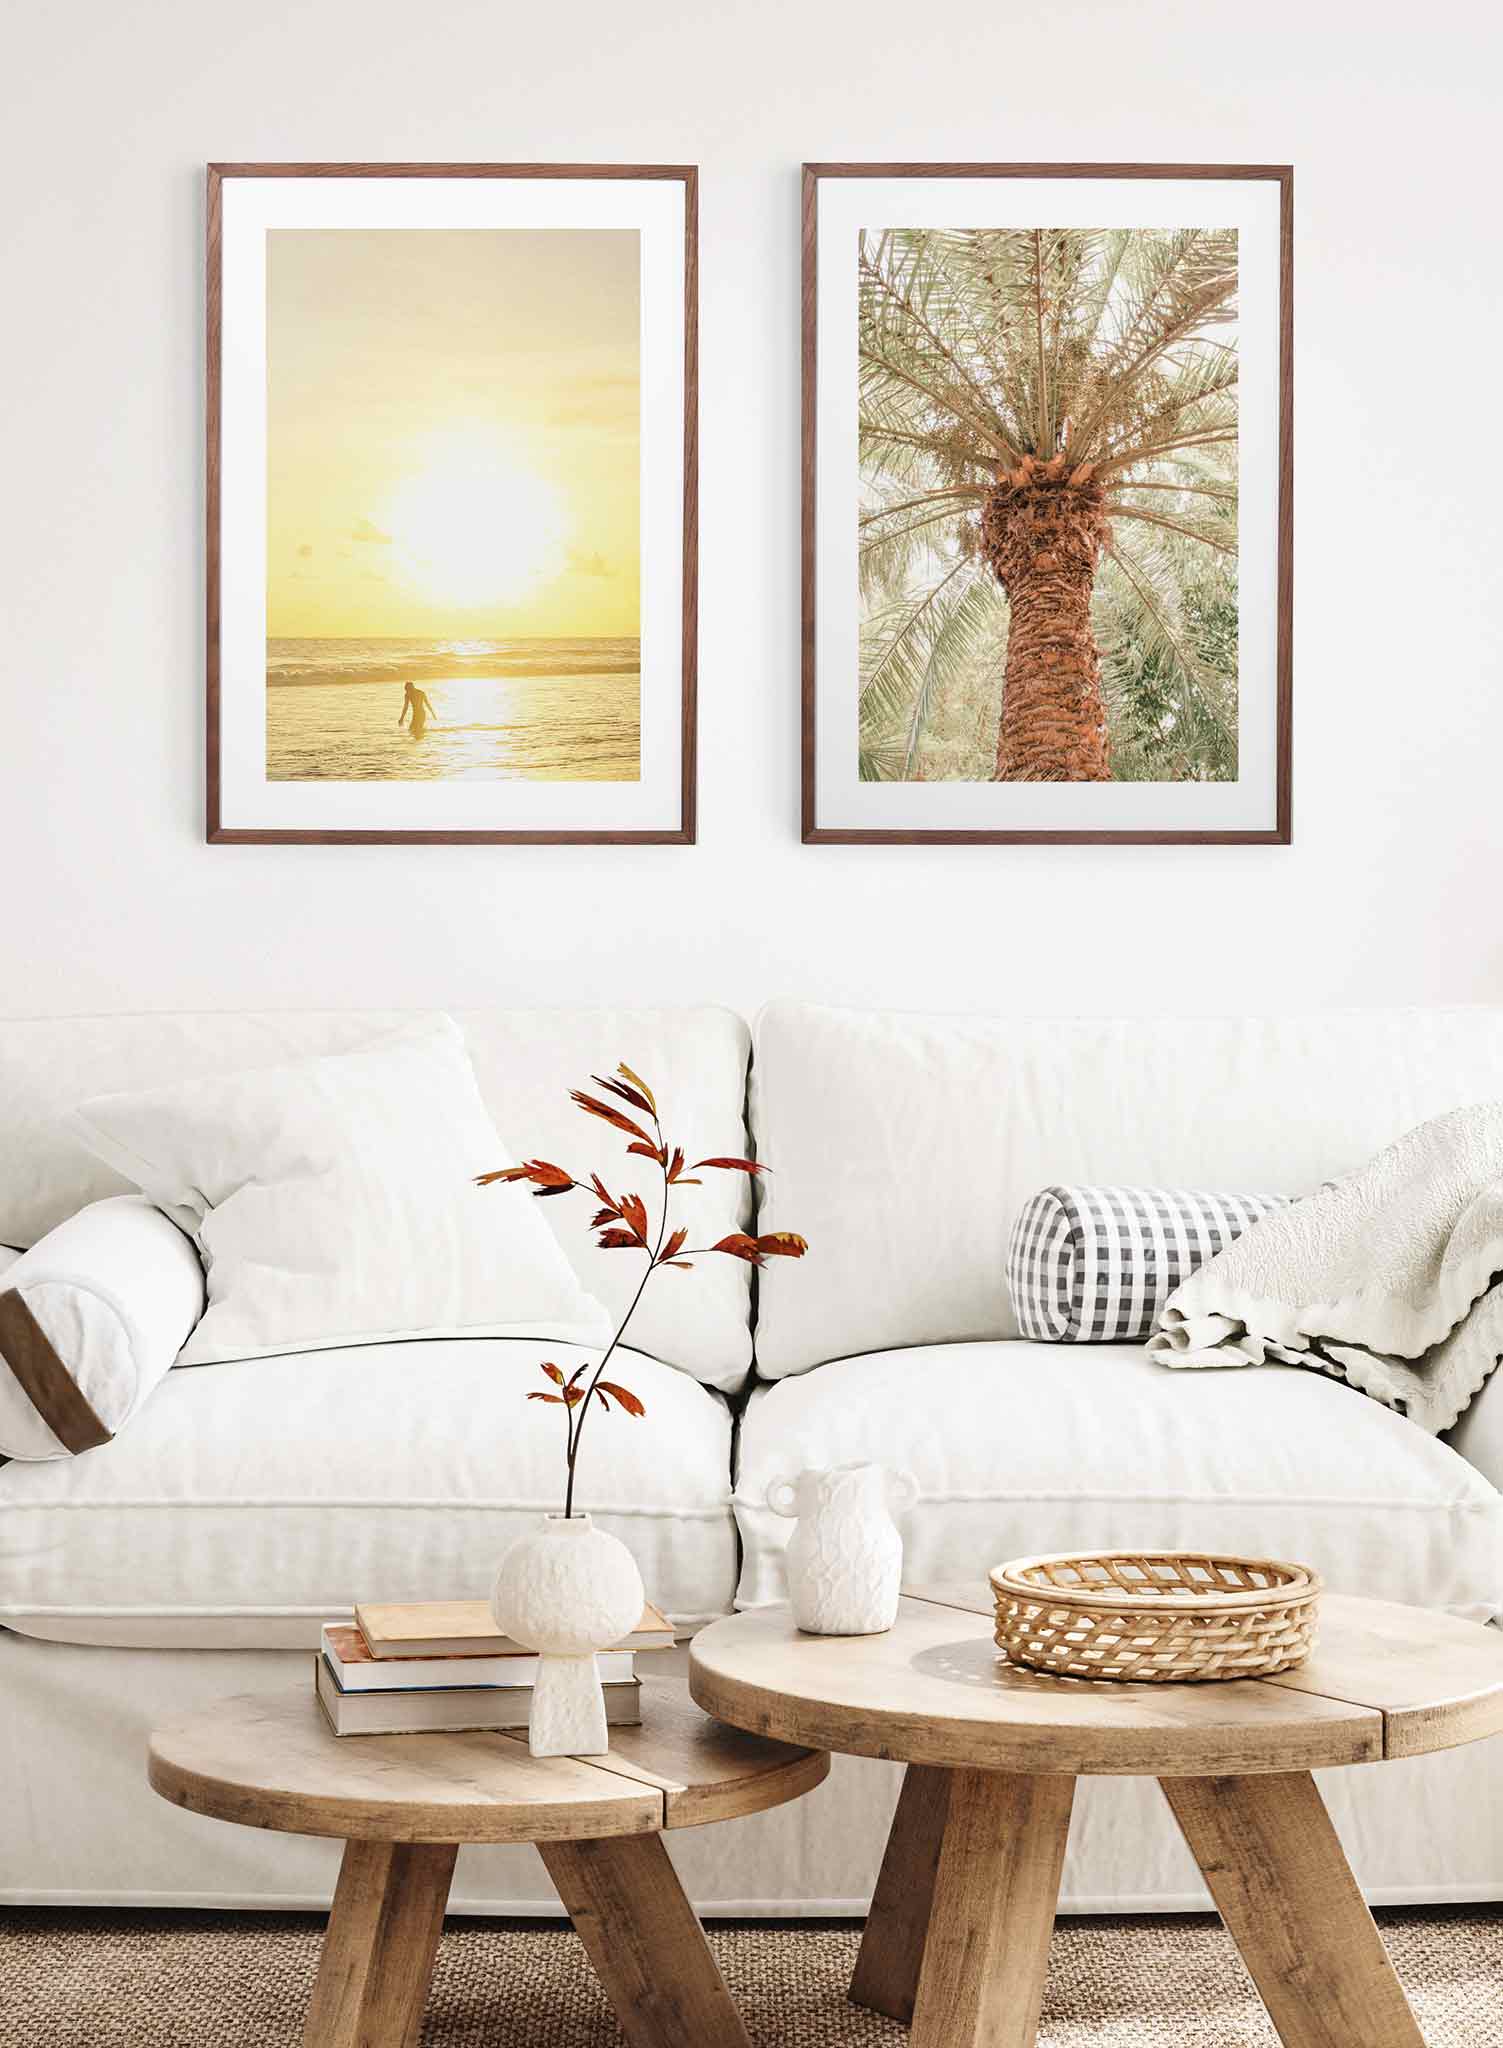 Golden Day is a minimalist lifestyle photography poster of a blinding sunset setting over the sea by Opposite Wall.